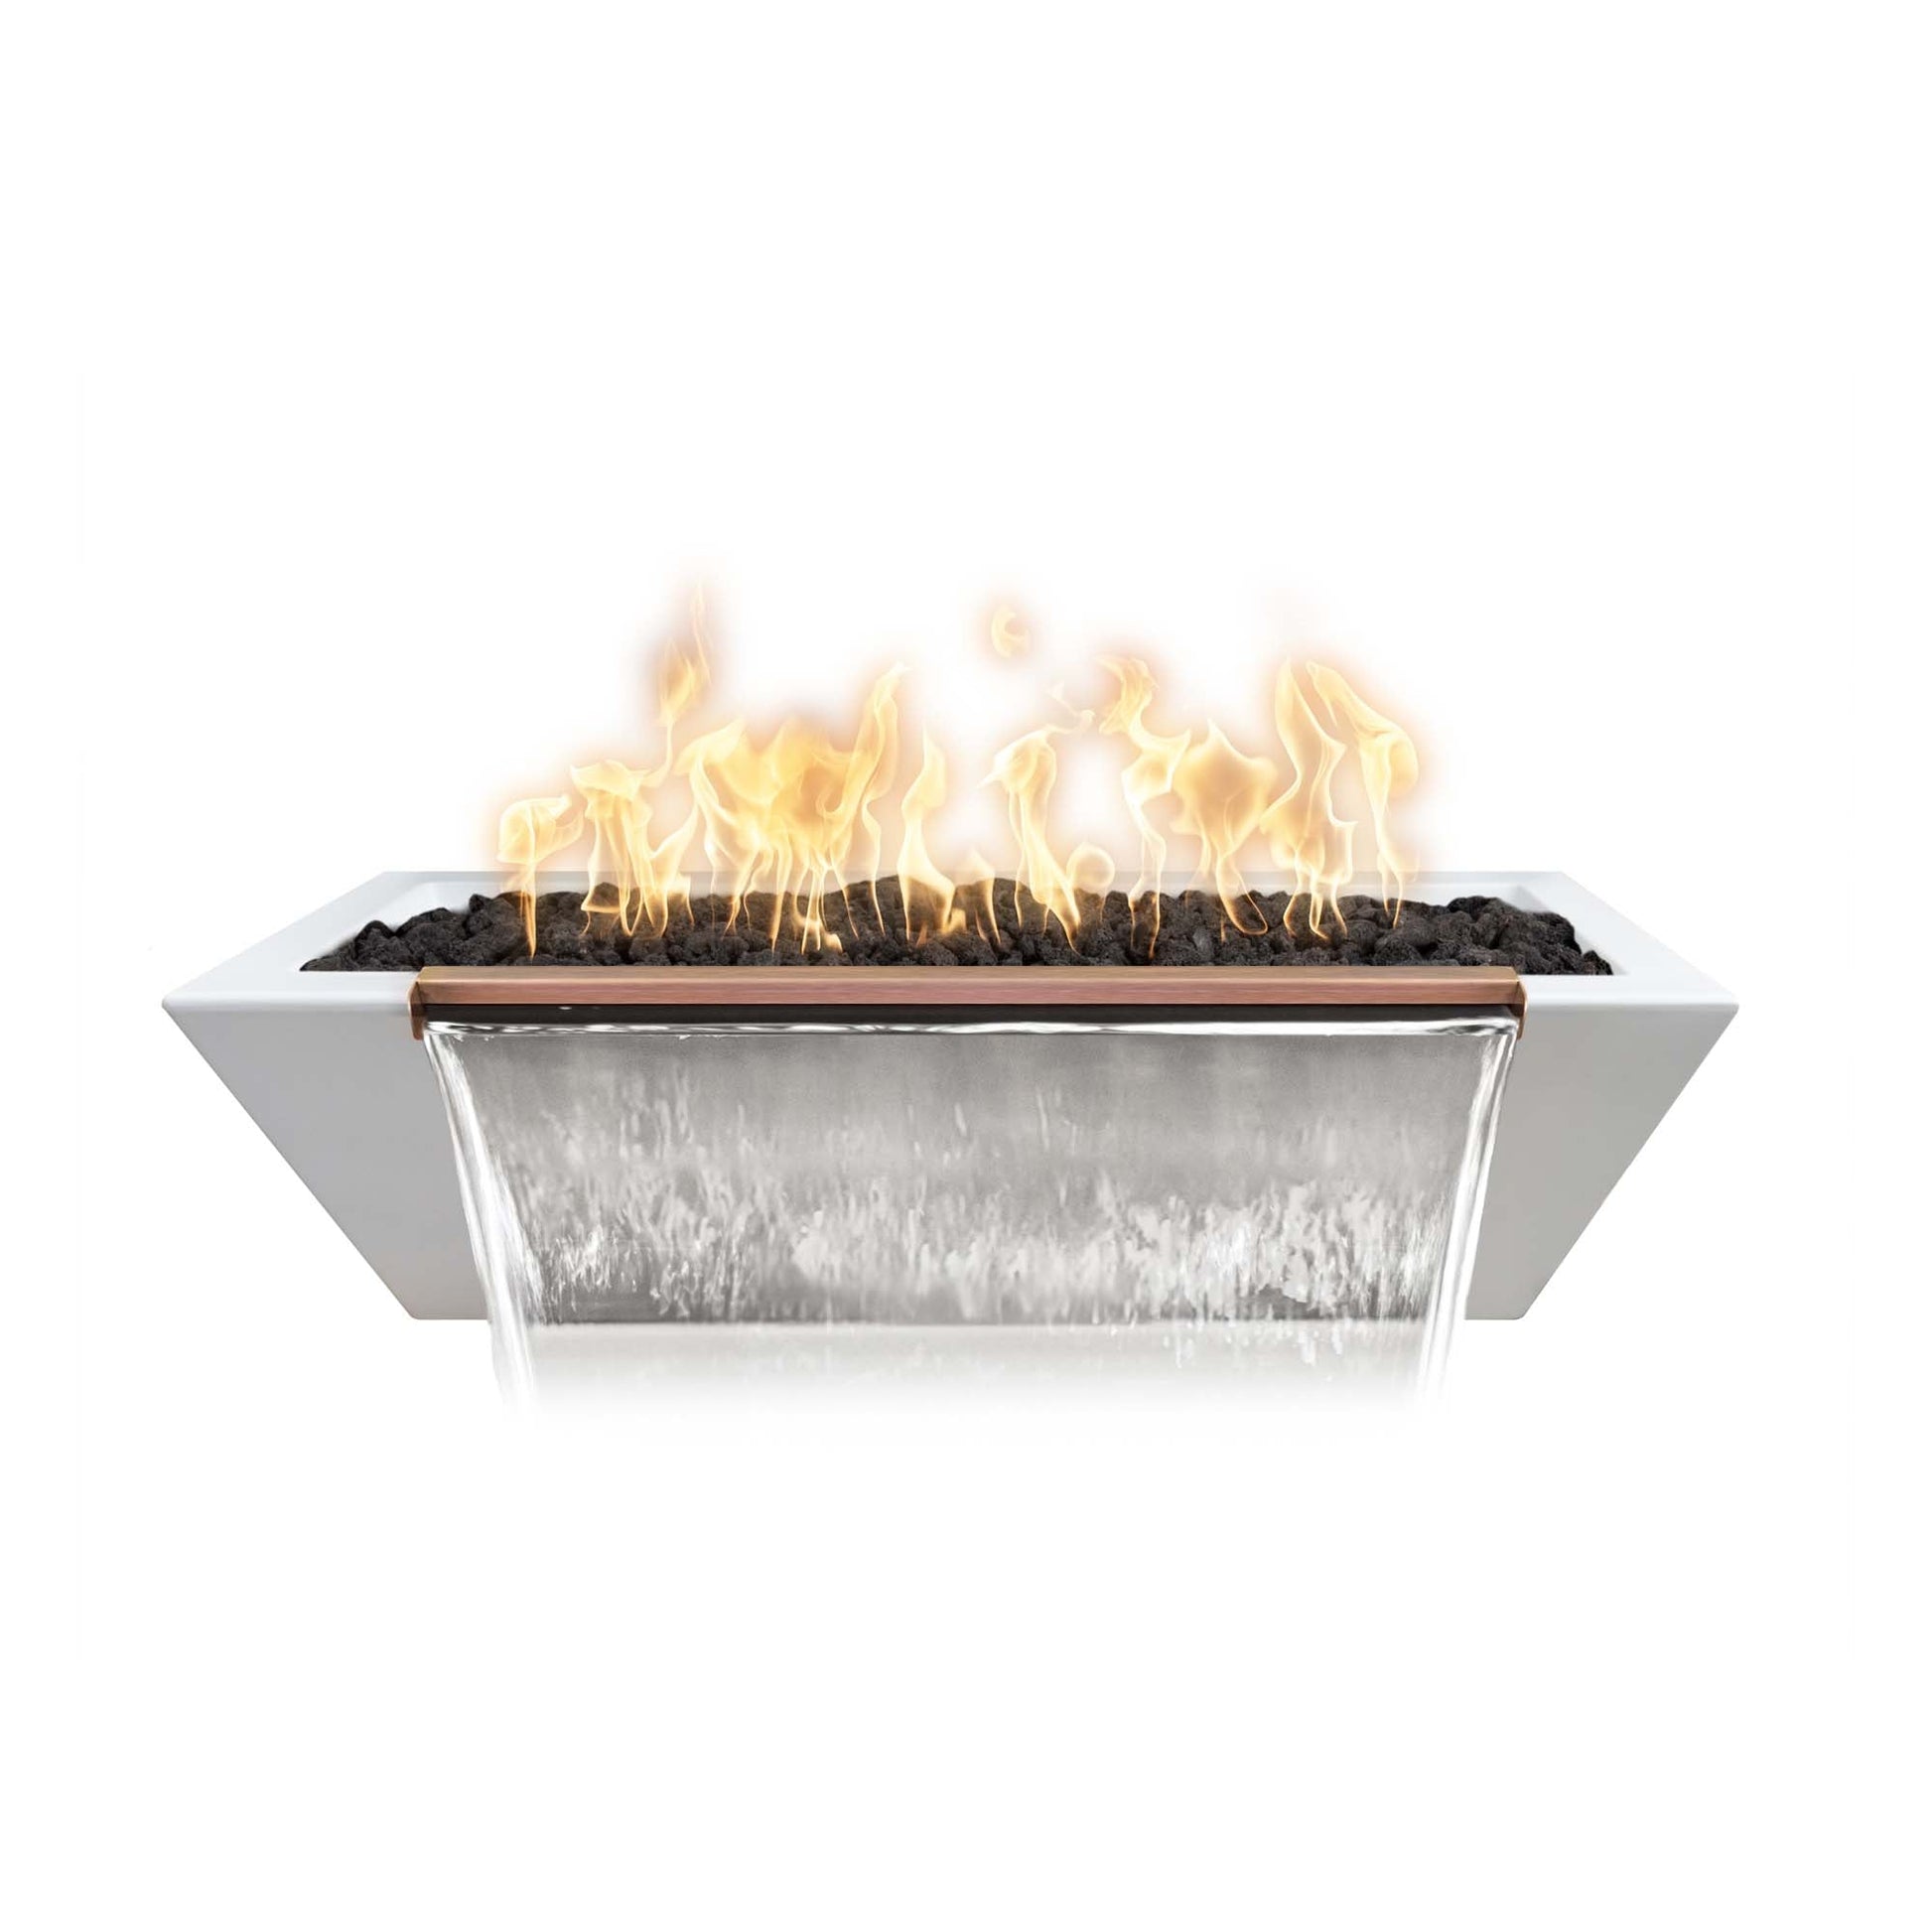 The Outdoor Plus Linear Maya 48" Metallic Copper GFRC Concrete Natural Gas Fire & Water Bowl with Match Lit with Flame Sense Ignition